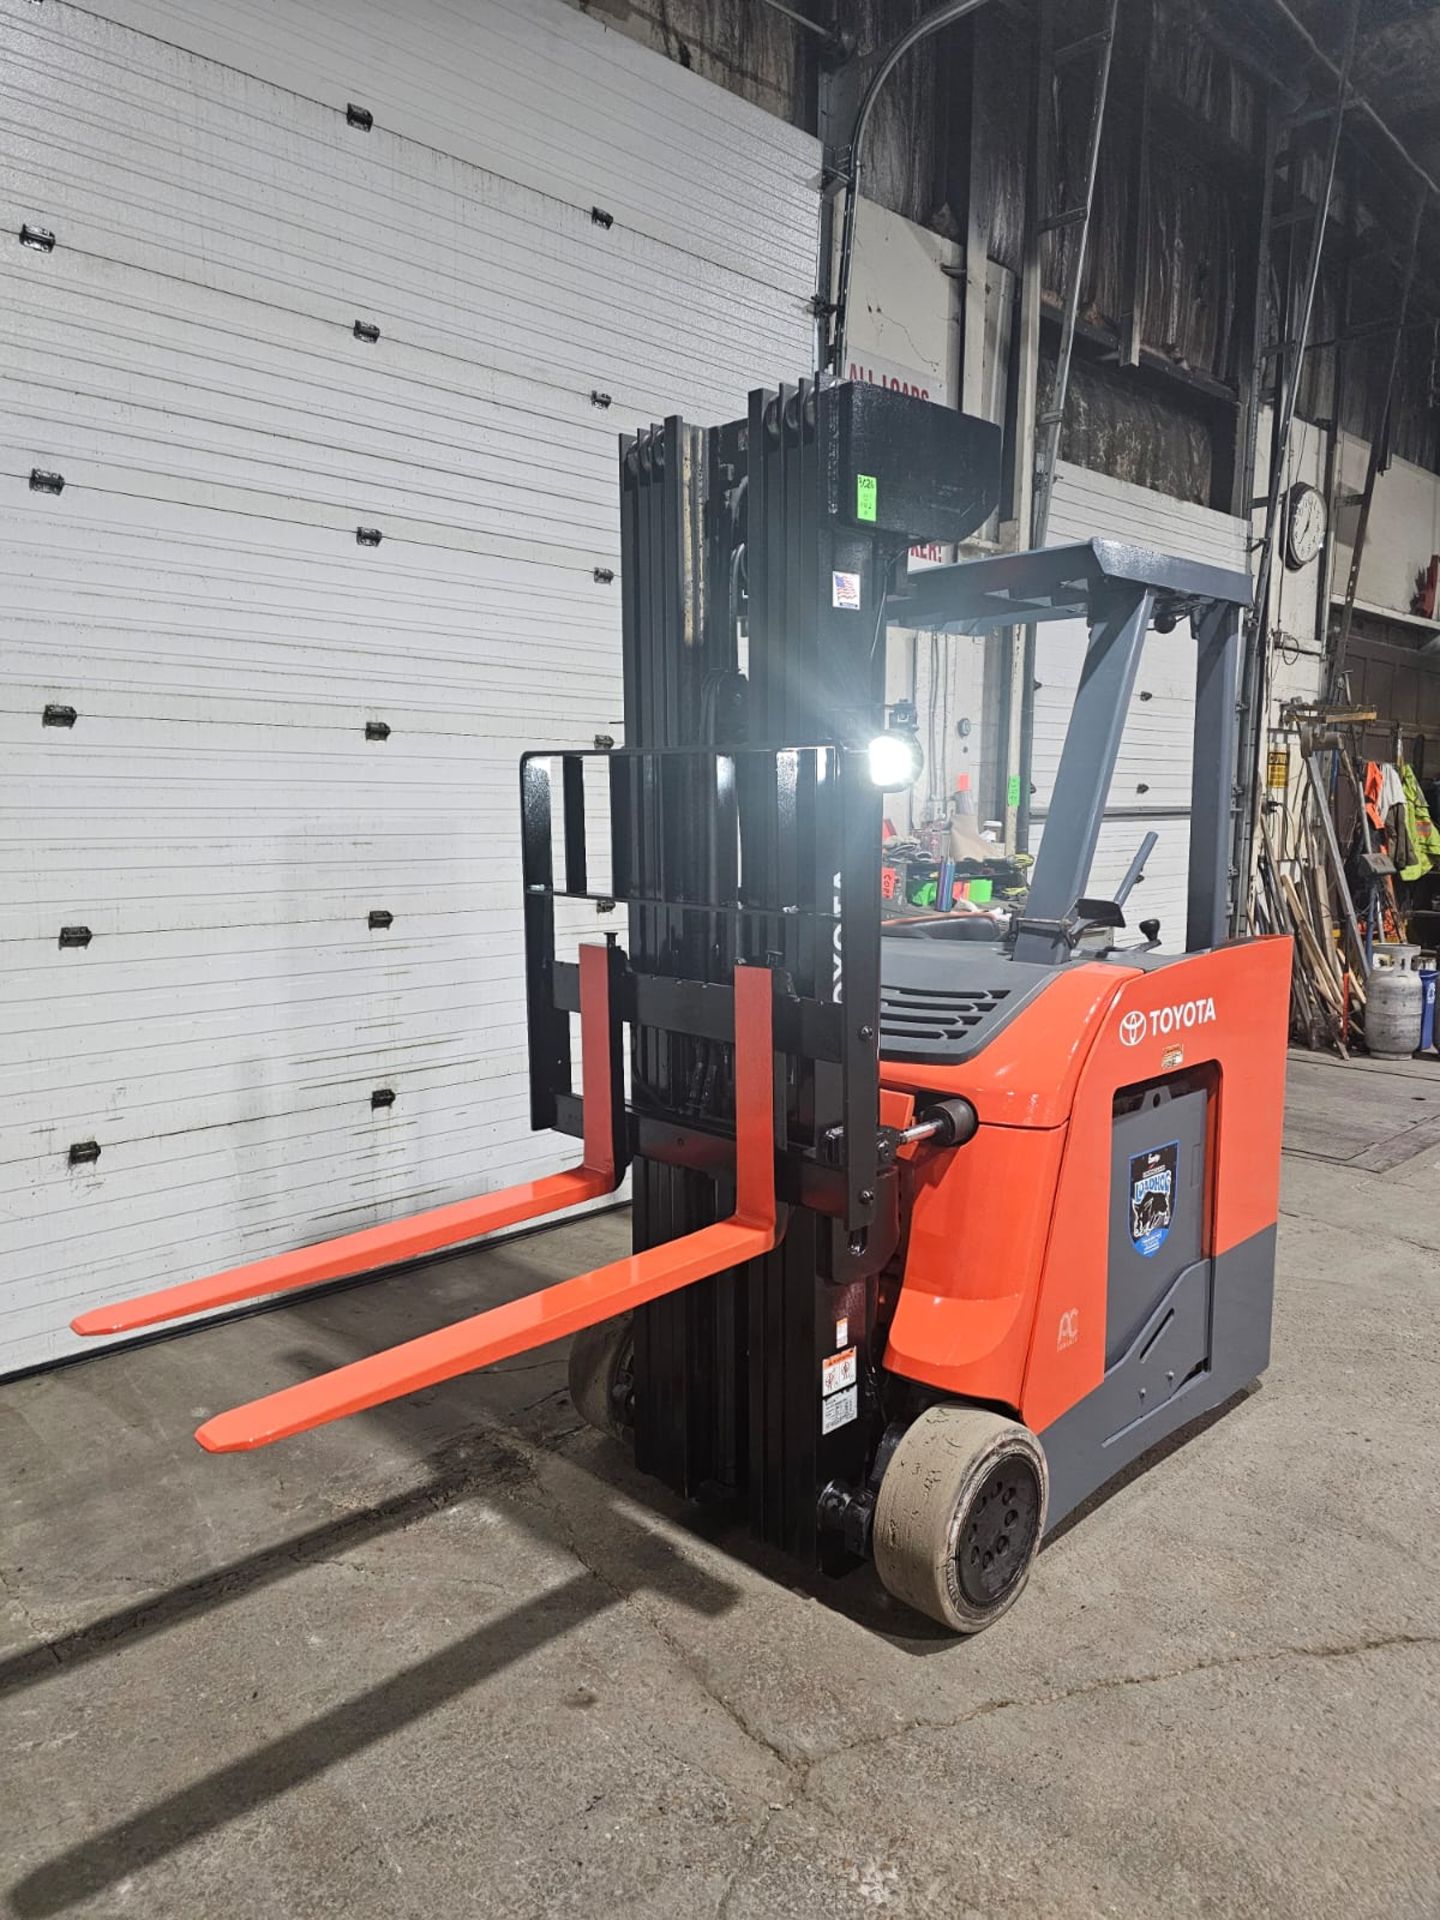 2017 Toyota 4,000lbs Capacity Electric Forklift with 4-STAGE Mast, 276" load height sideshift, 36V - Image 5 of 7